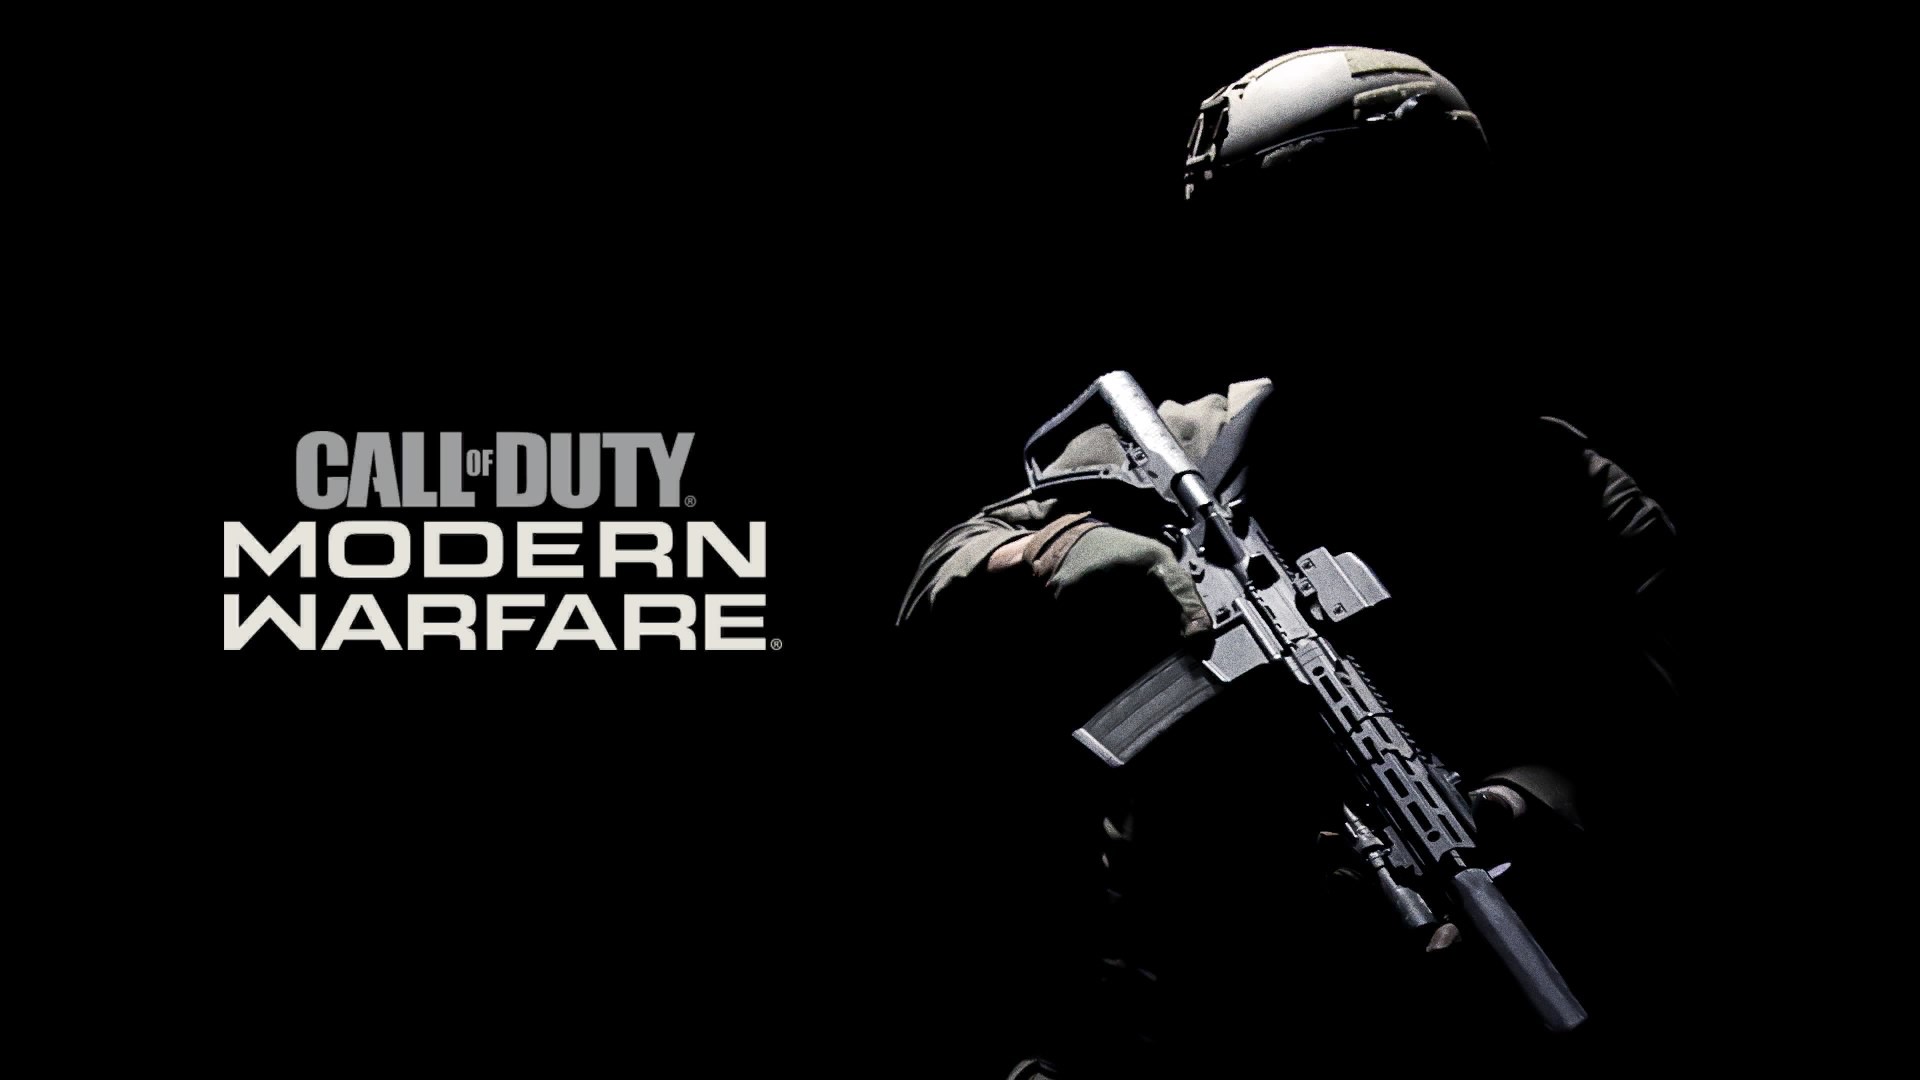 Wallpaper / Call of Duty Modern Warfare, Call of Duty, video games, weapon, soldier, black background free download